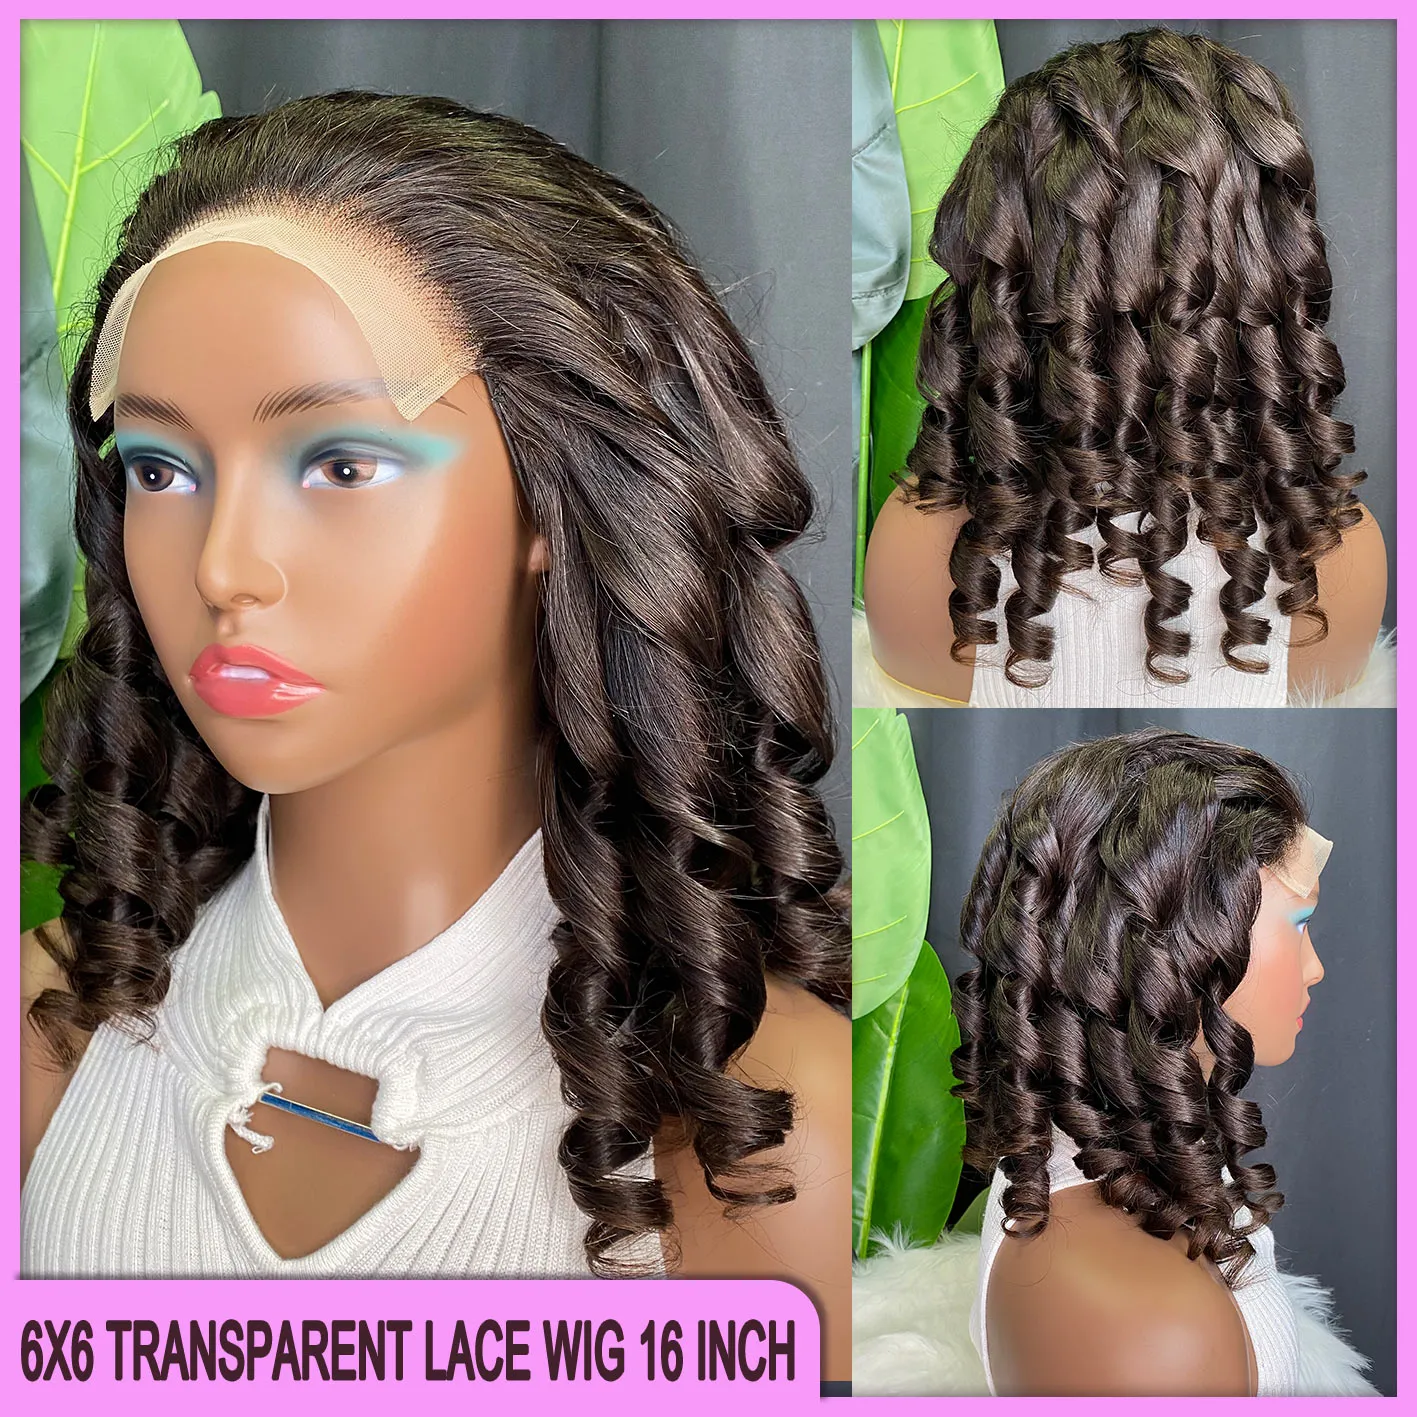 Wholesale Malaysian Peruvian Brazilian Natural Black Loose Wave 6x6 Transparent Lace Closure Wig 16 Inch 100% Virgin Remy Human Hair On Sale